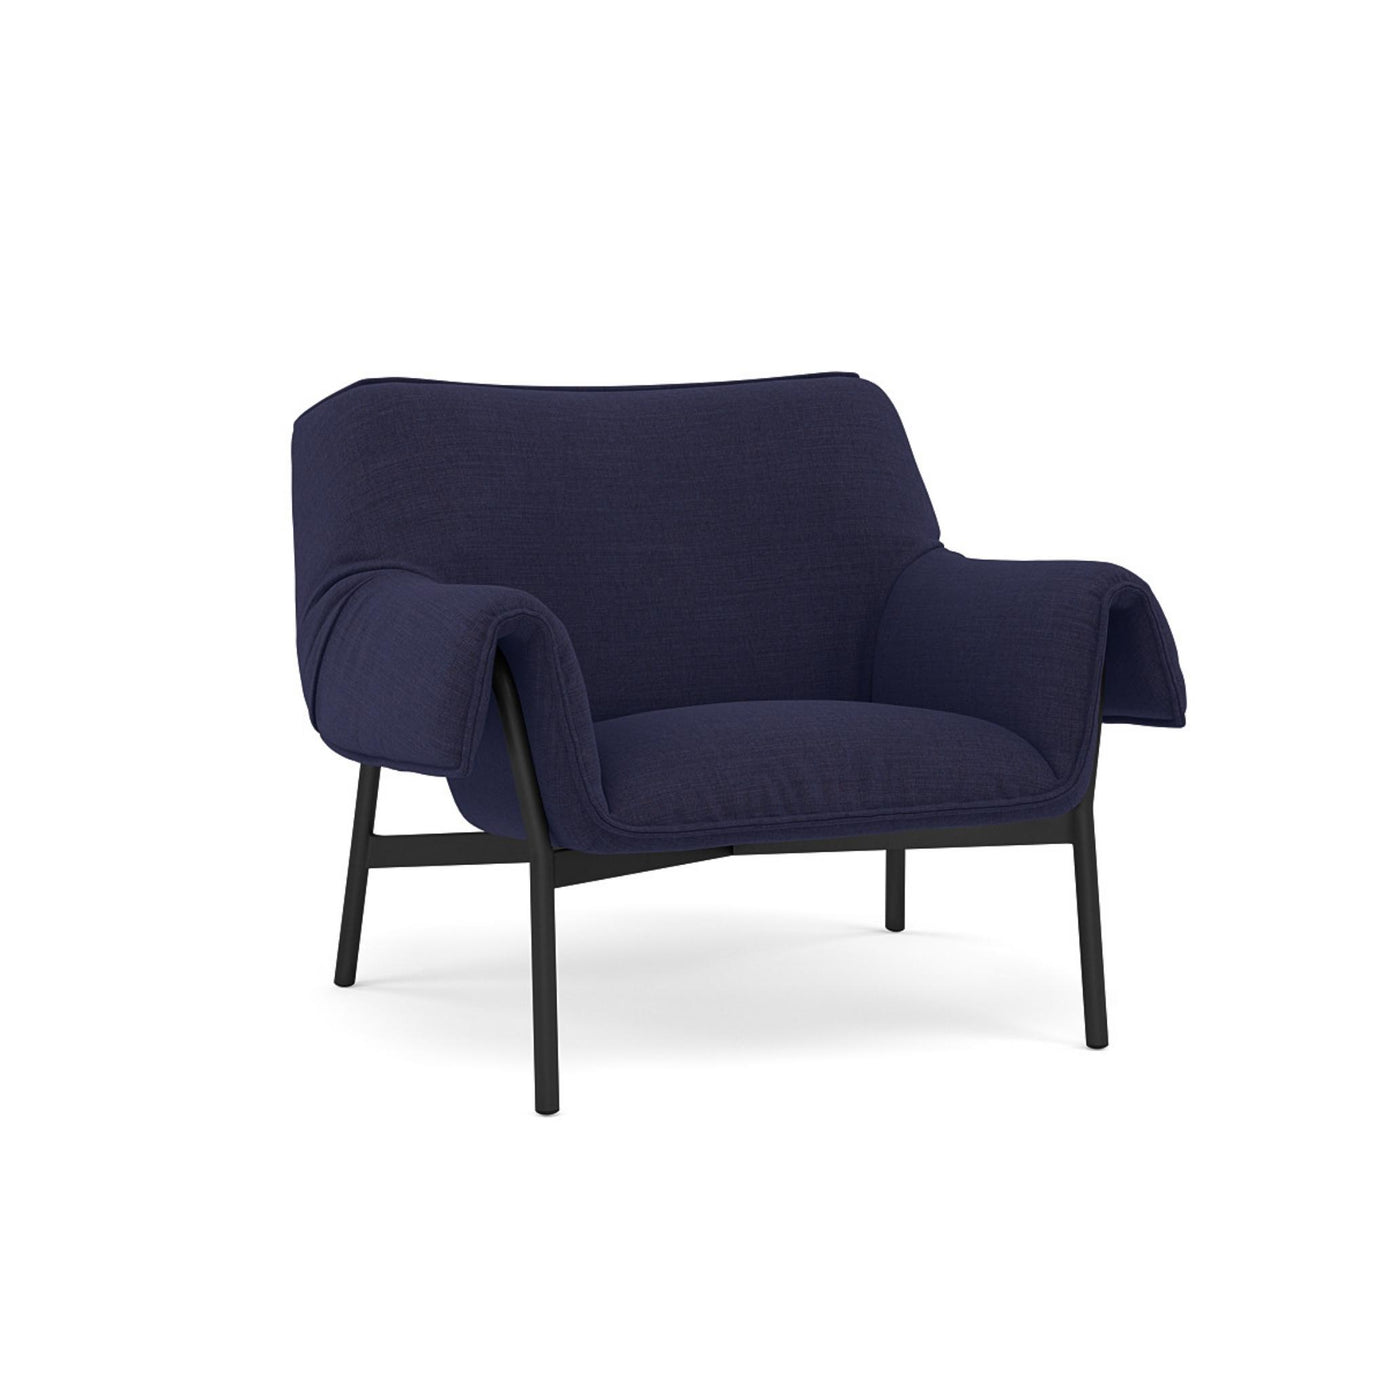 Muuto Wrap Lounge Chair. Made to order from someday designs. #colour_canvas-684-blue